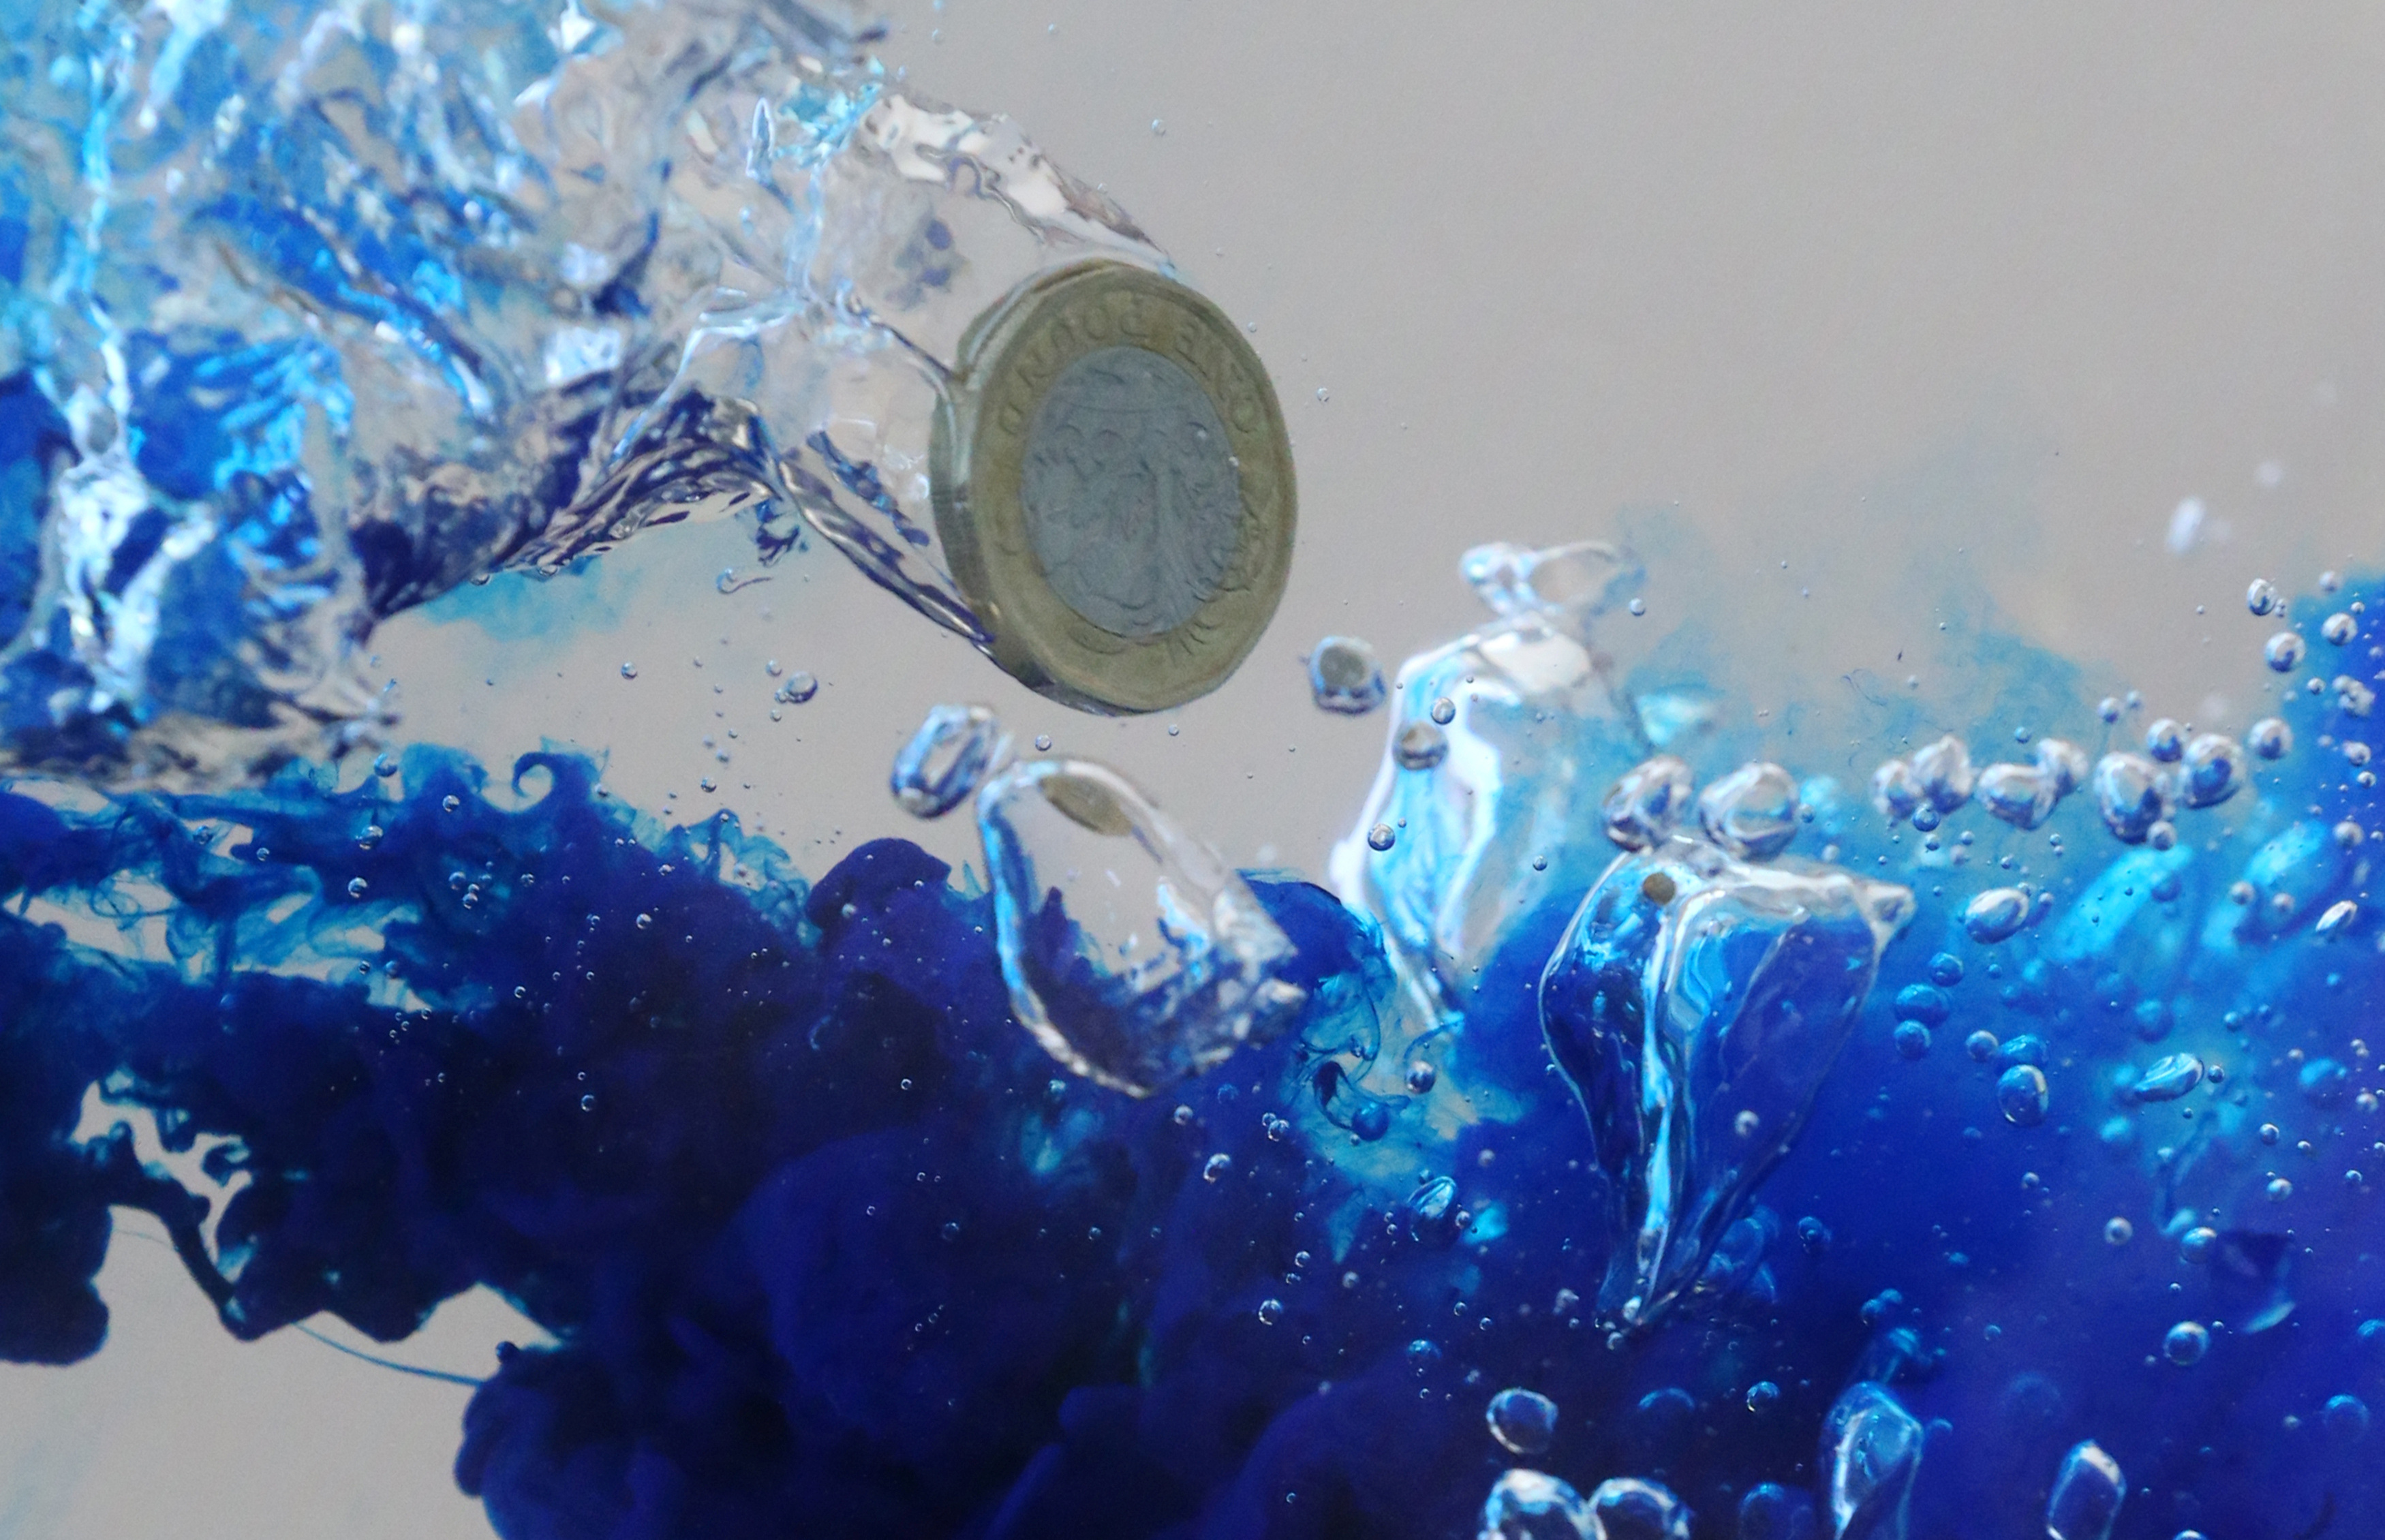 Poltics UK pound coin plunges into water in this illustration picture